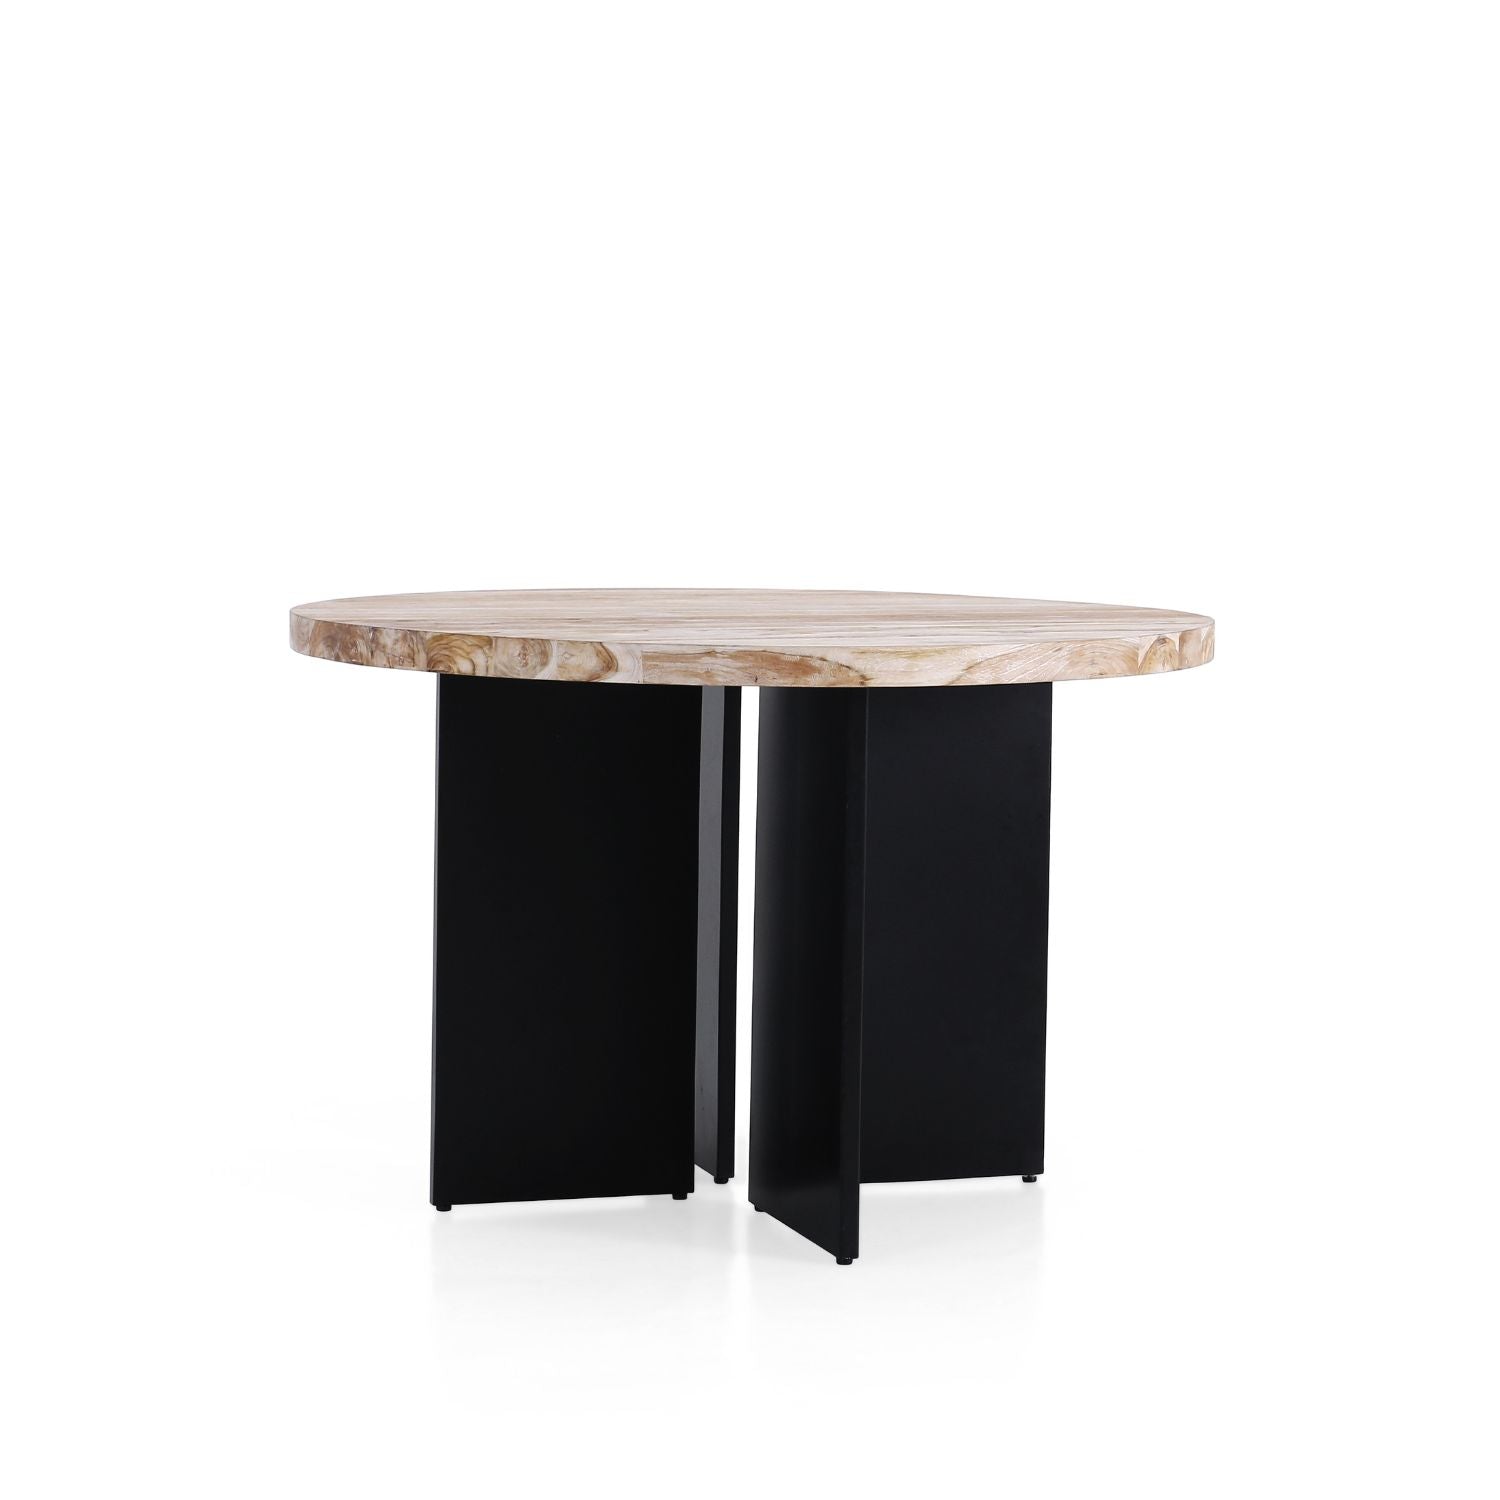 Aniline Dining Table - Valyou 